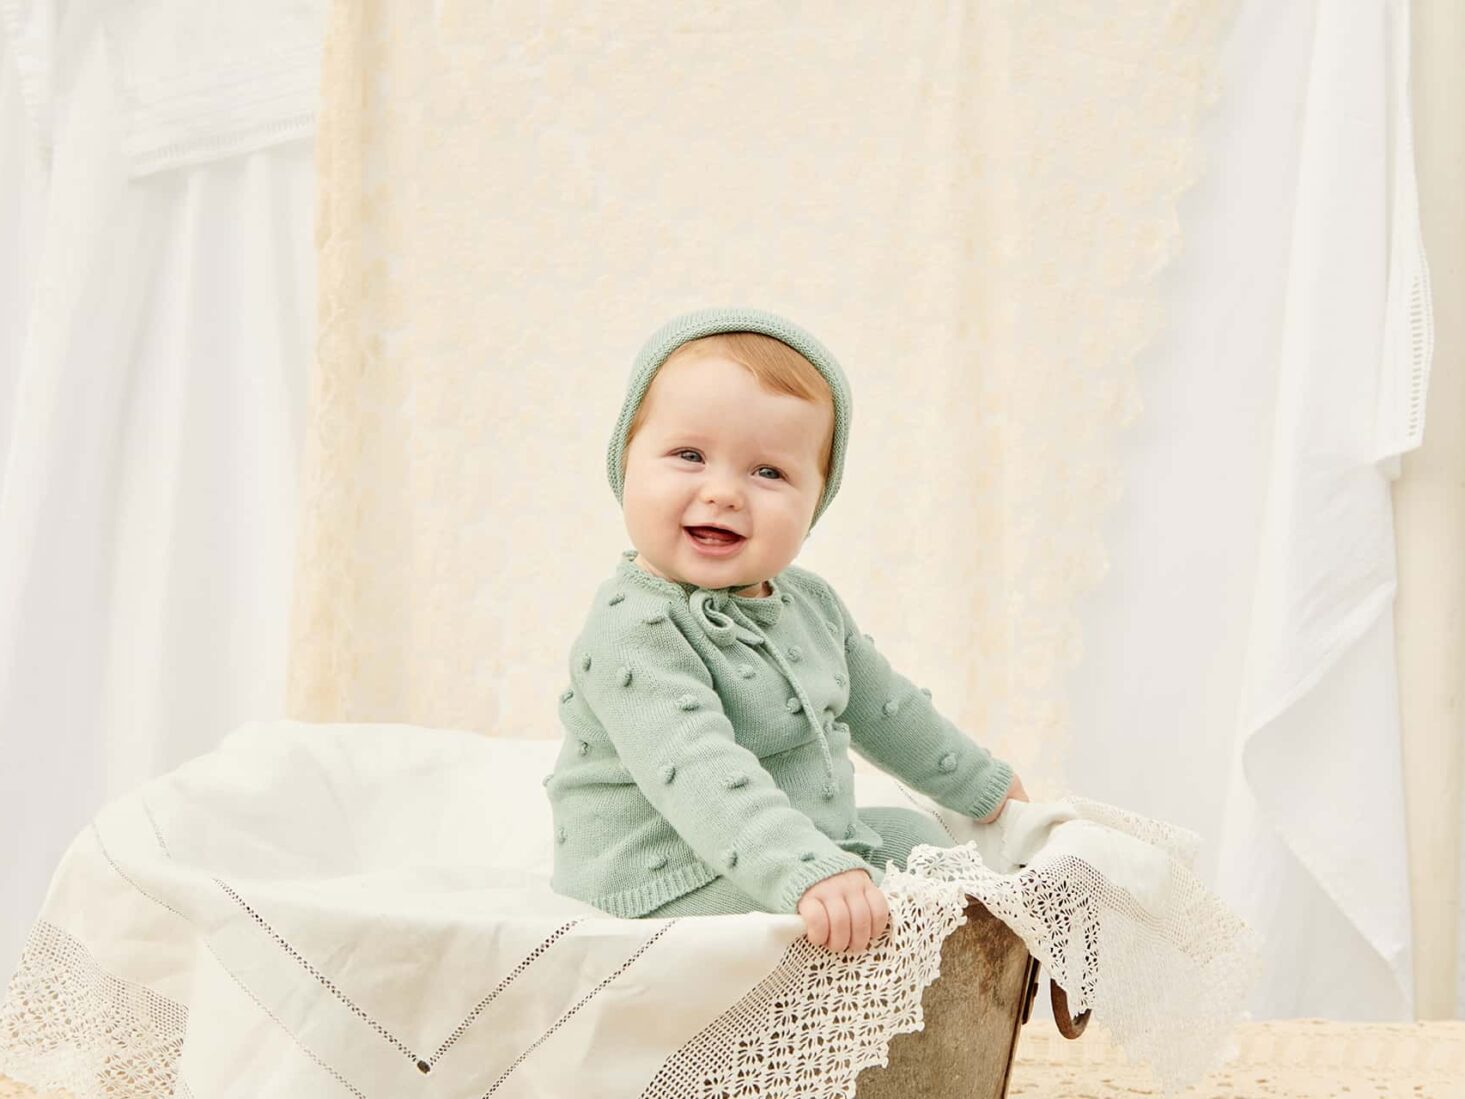 The childrenswear and baby boutiques in